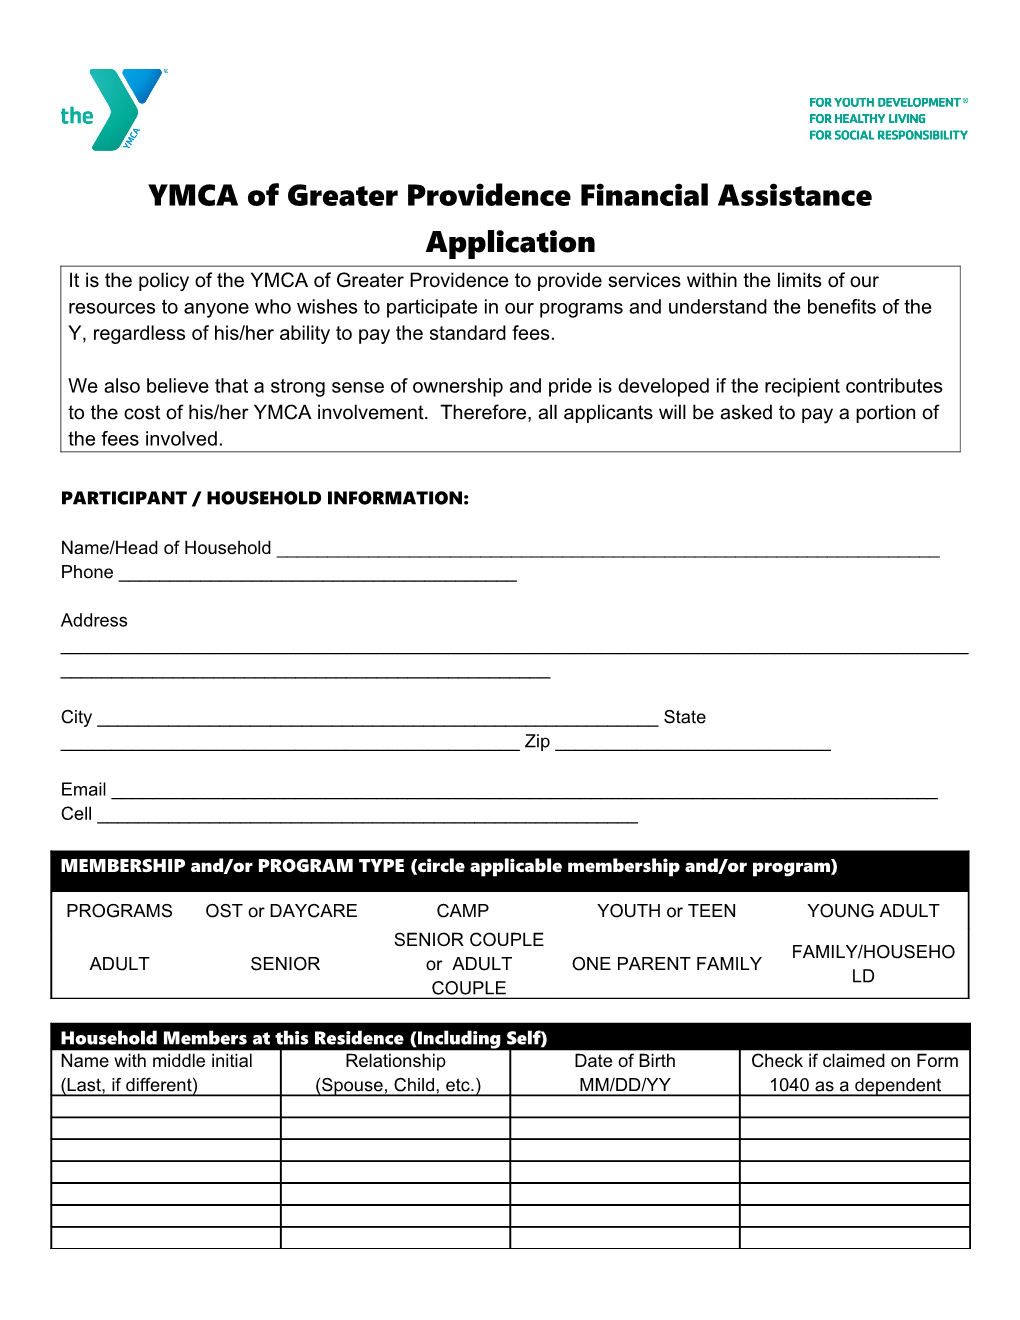 YMCA of Greater Providence Financial Assistance Application